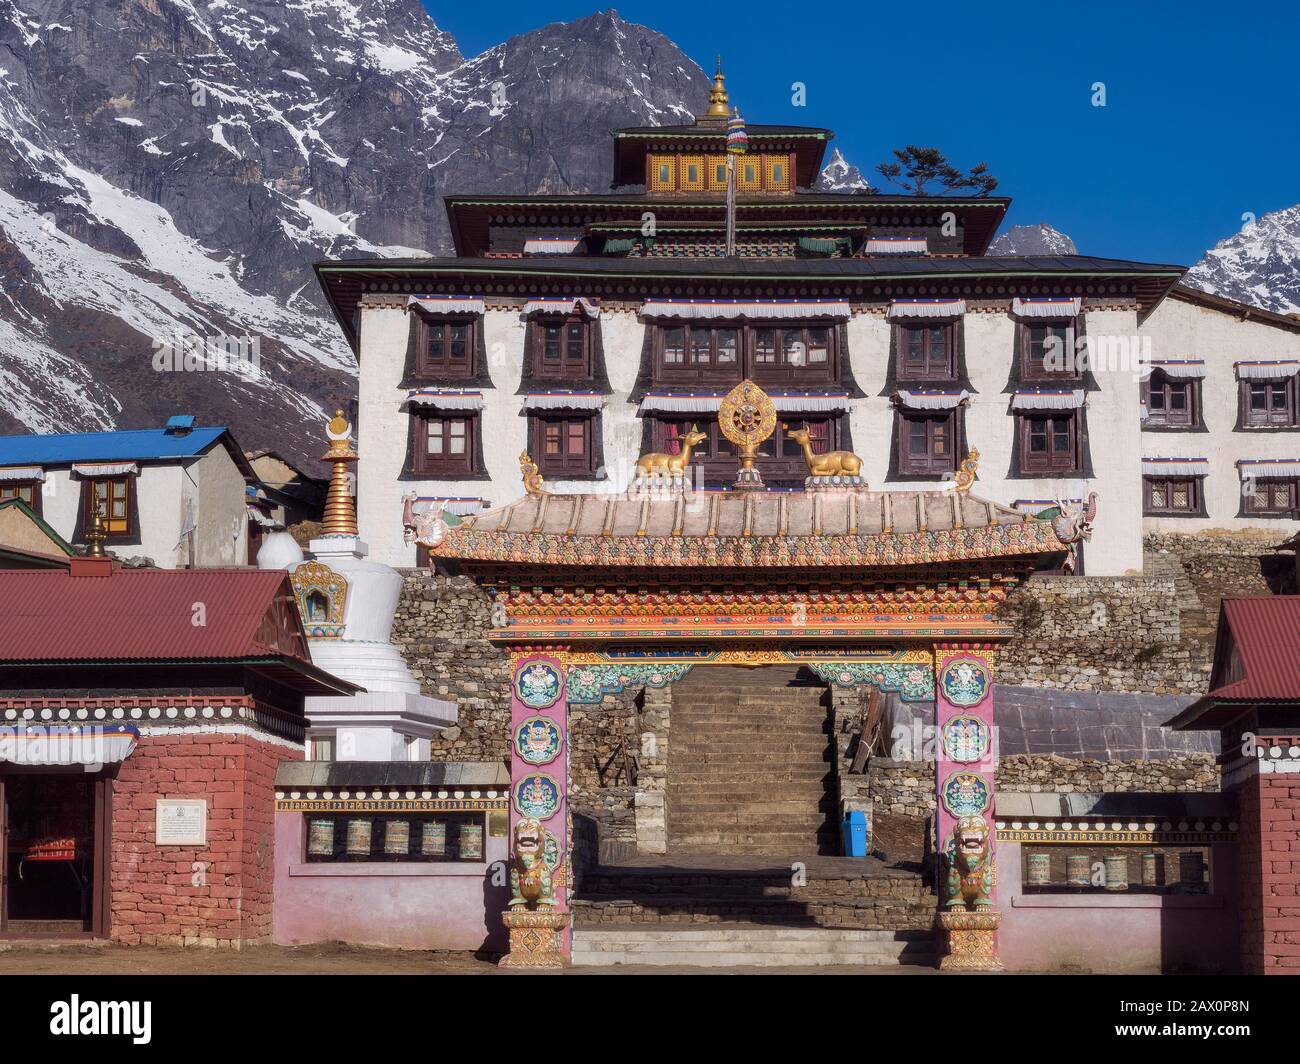 Tengboche Monastery, the largest and most important monastery on the way to Everest Base Camp, Khumbu Region, Nepal. Stock Photo